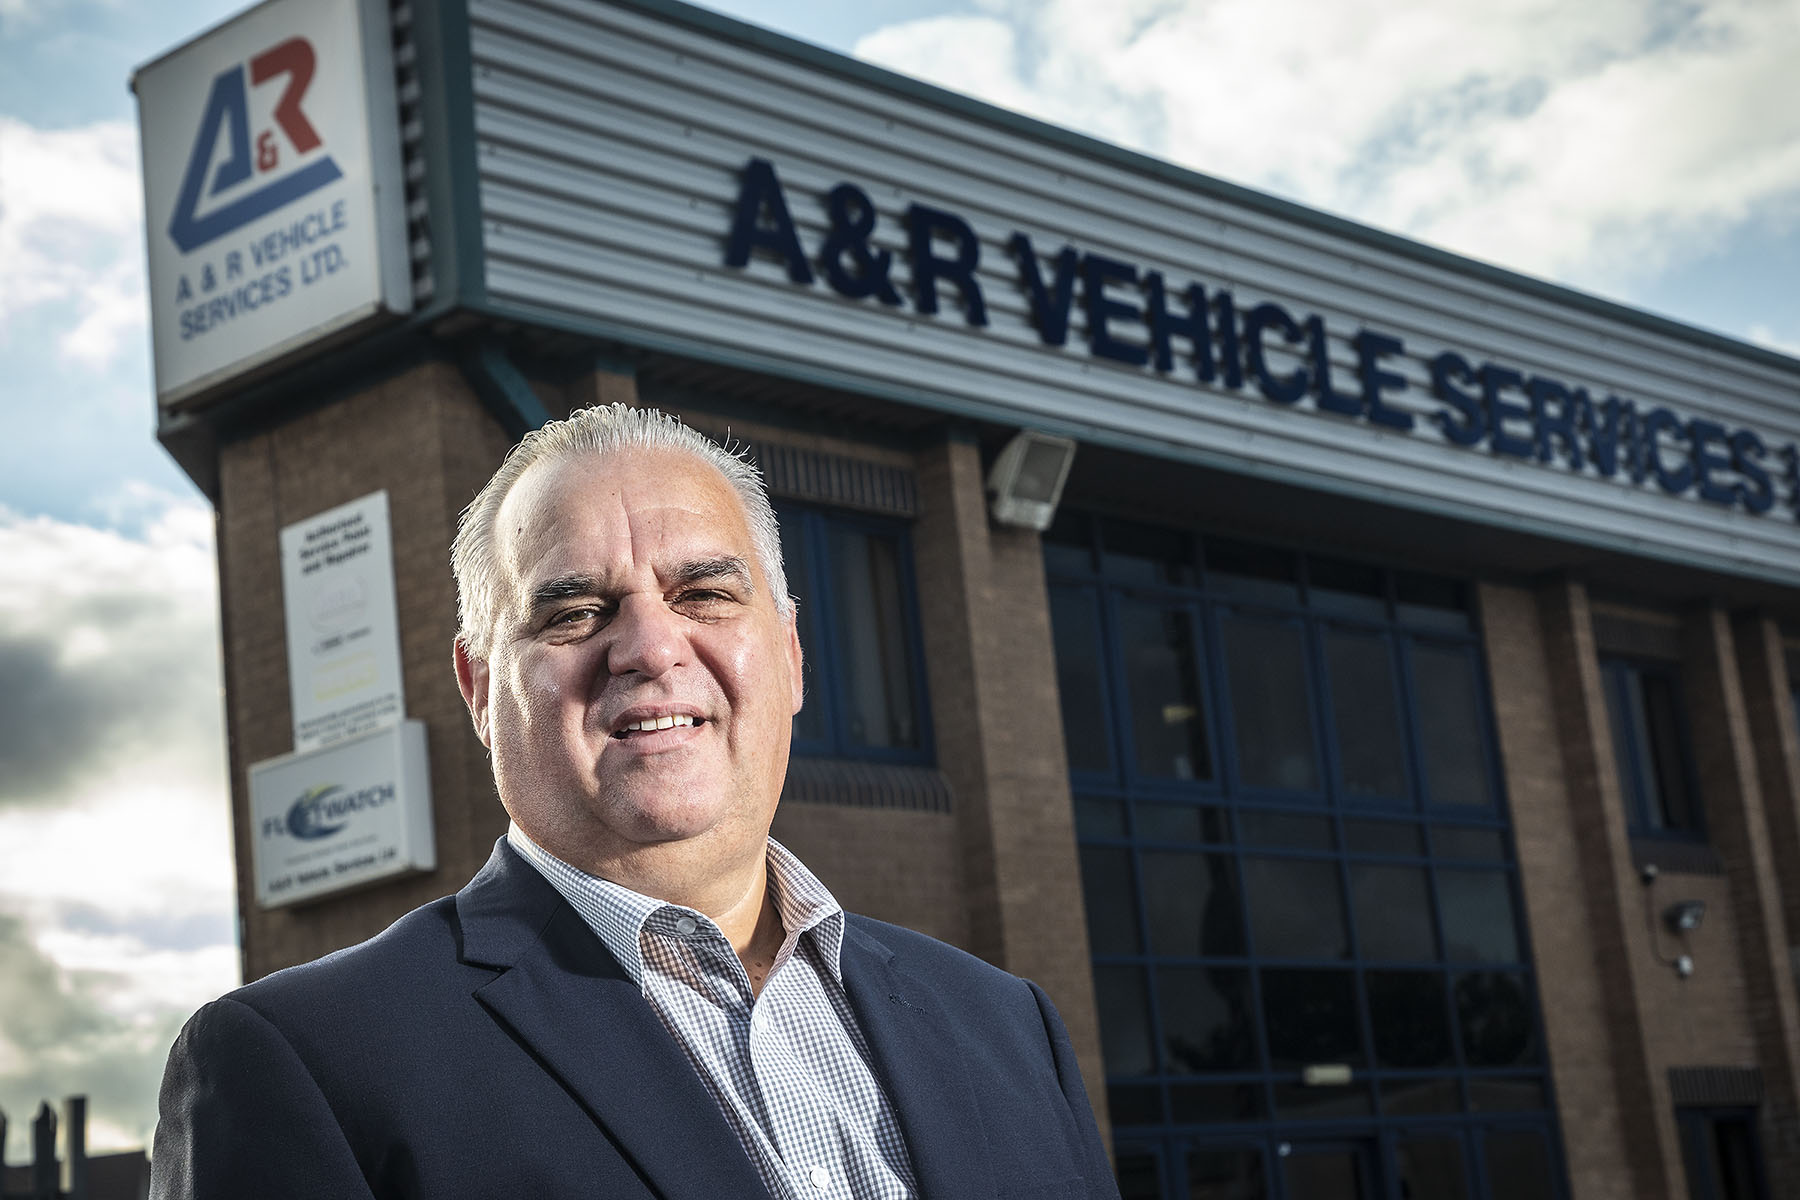 Gary Lay will be going for growth at A&R Vehicle Services